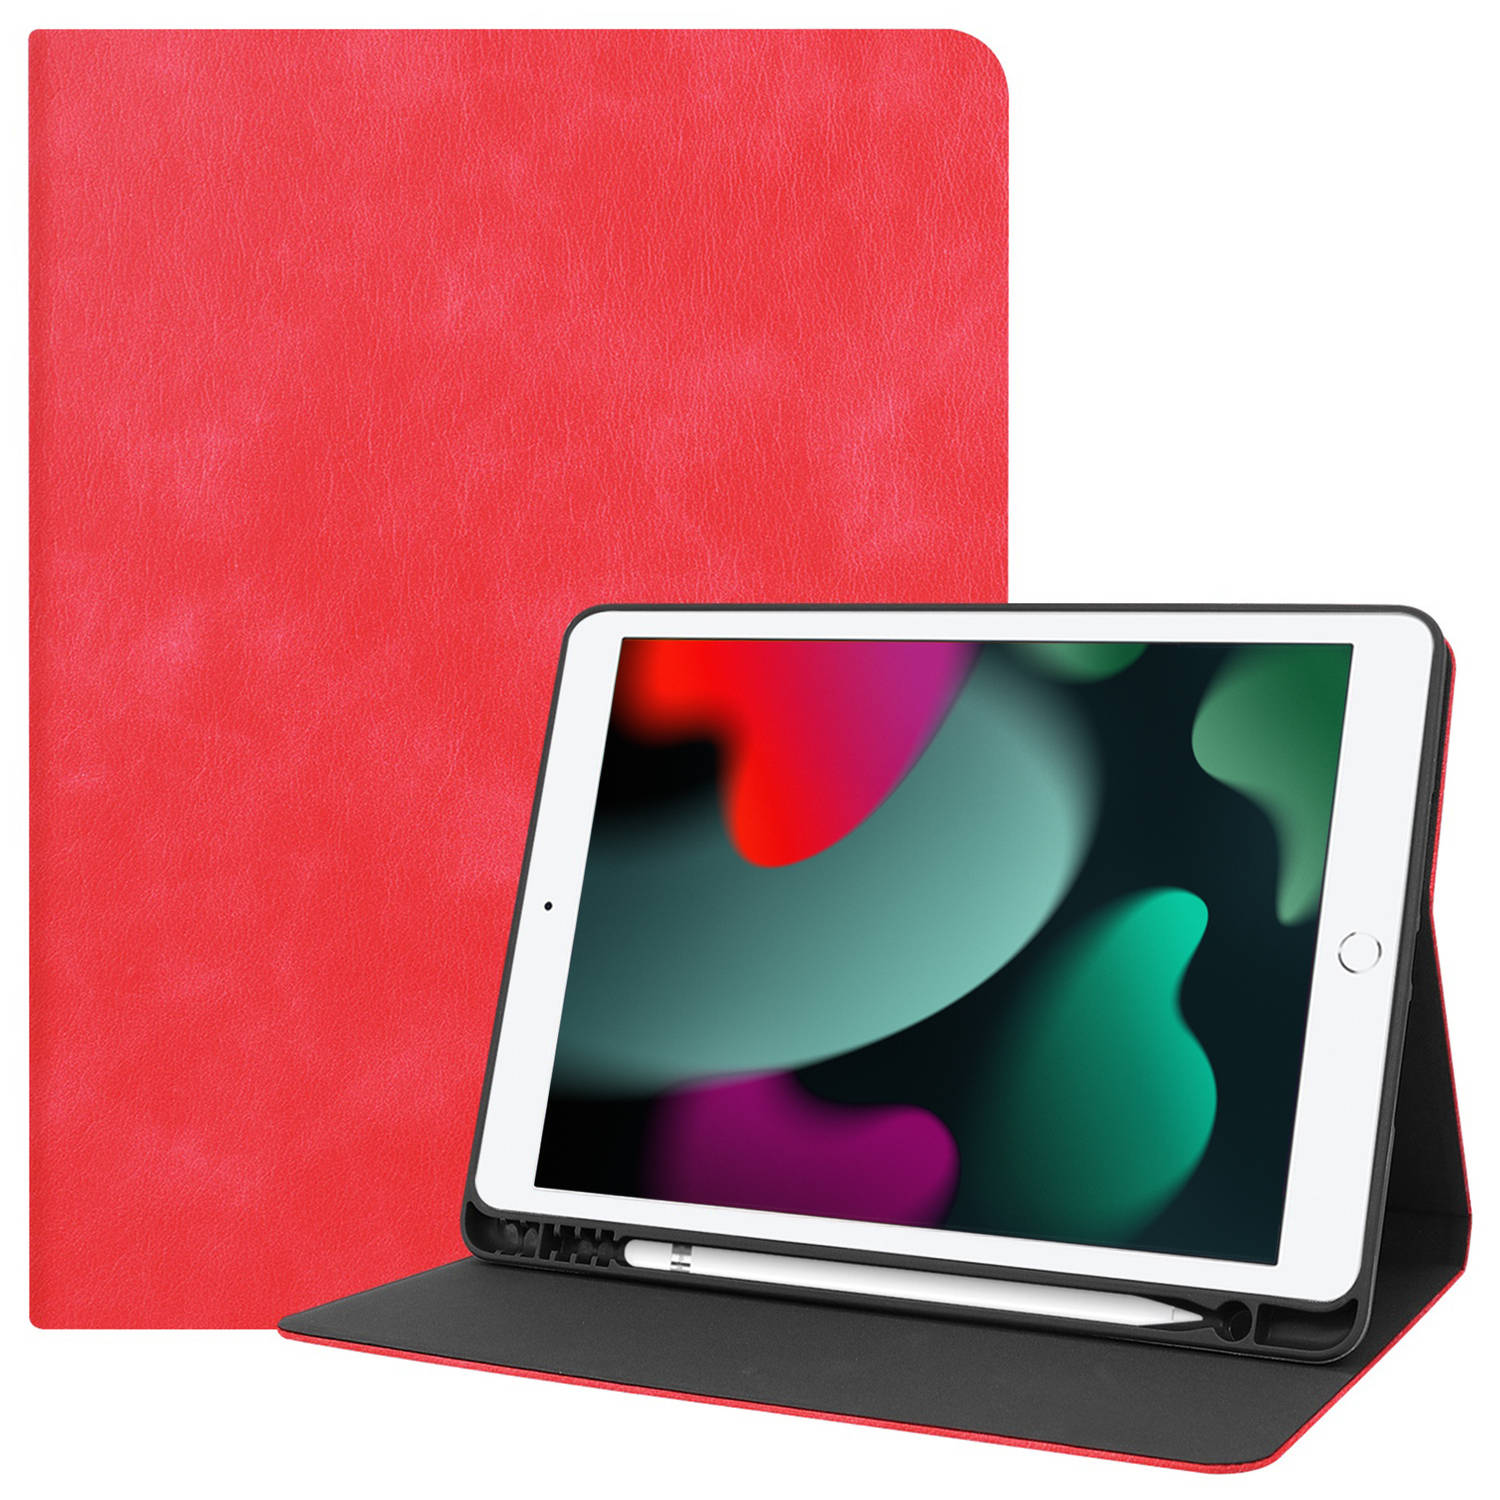 iPad 10.2 2021 Hoes Case Hoesje Hard Cover - iPad 10.2 2021 Hoesje Bookcase Met Uitsparing Apple Pencil - Rood